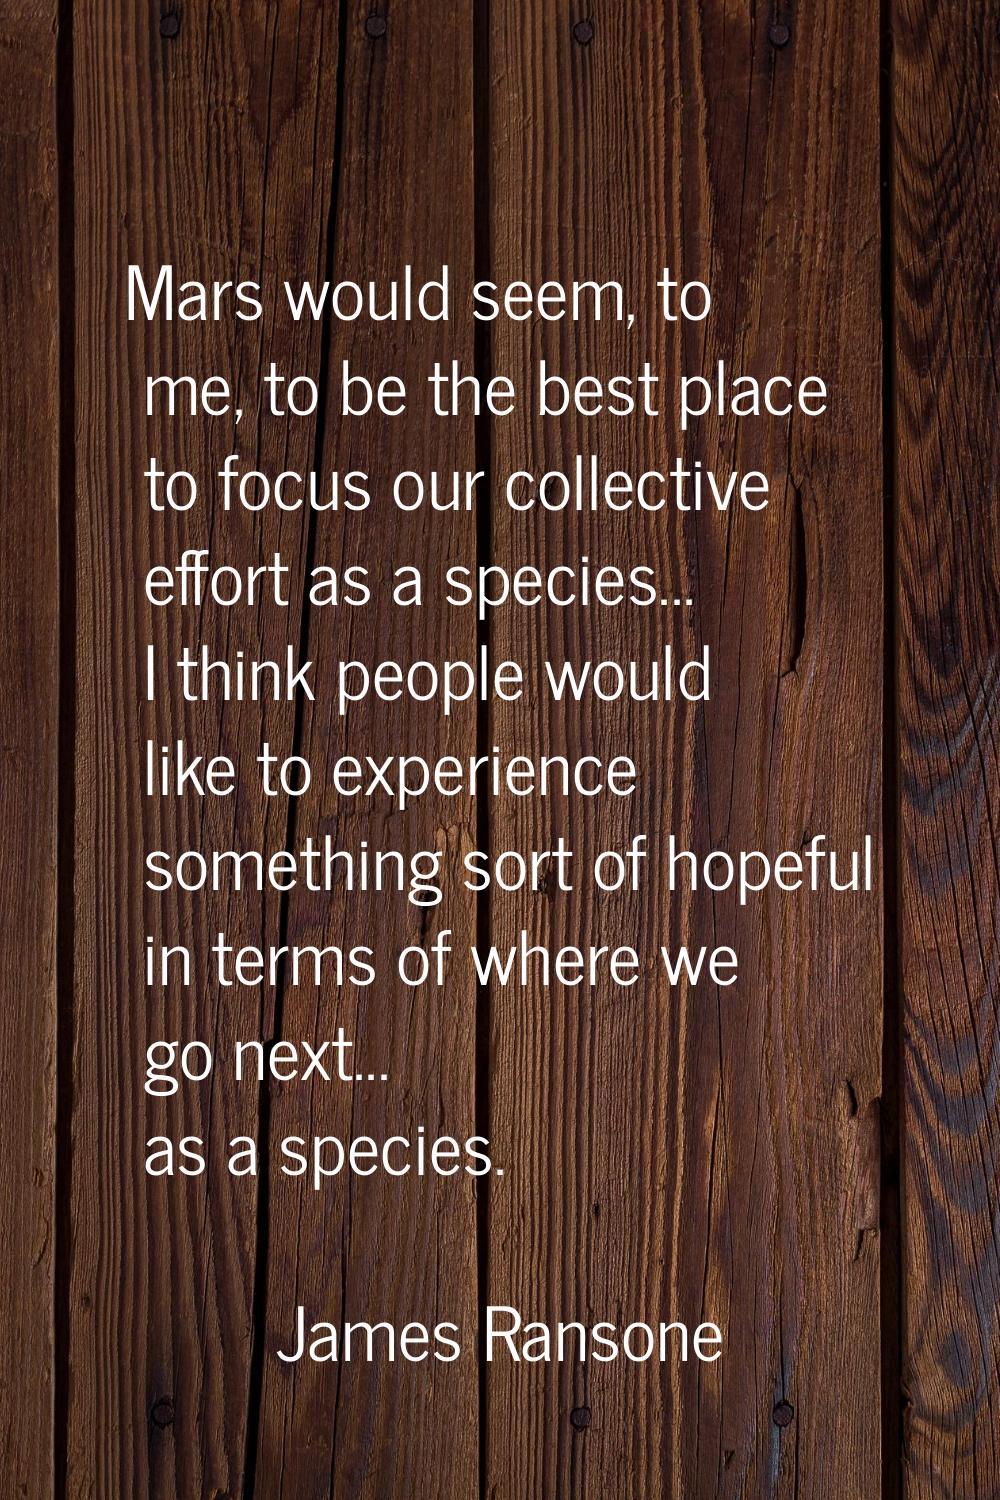 Mars would seem, to me, to be the best place to focus our collective effort as a species... I think